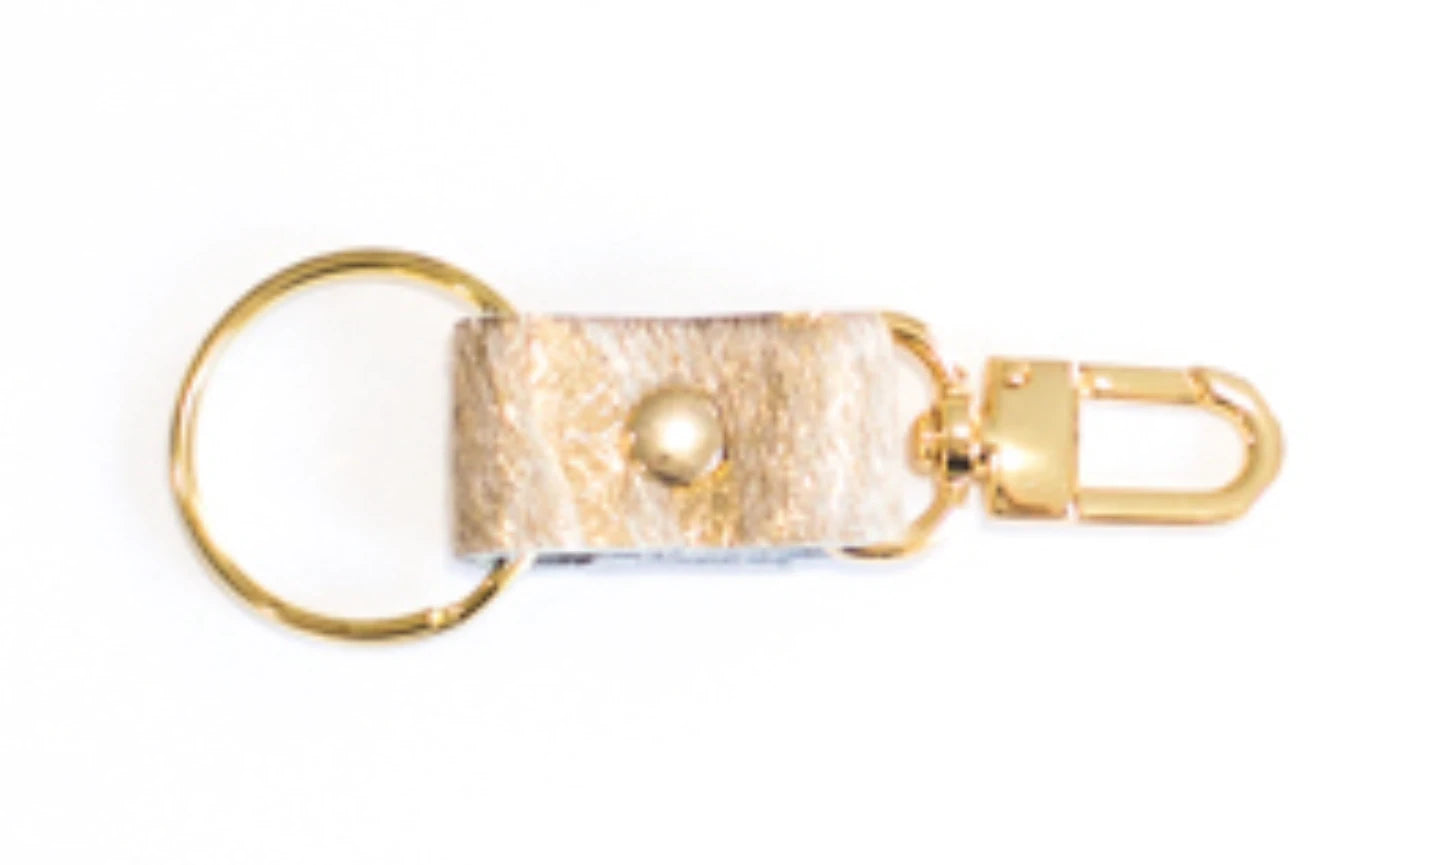 Upcycled Key Couture Clip – Beaudin Designs